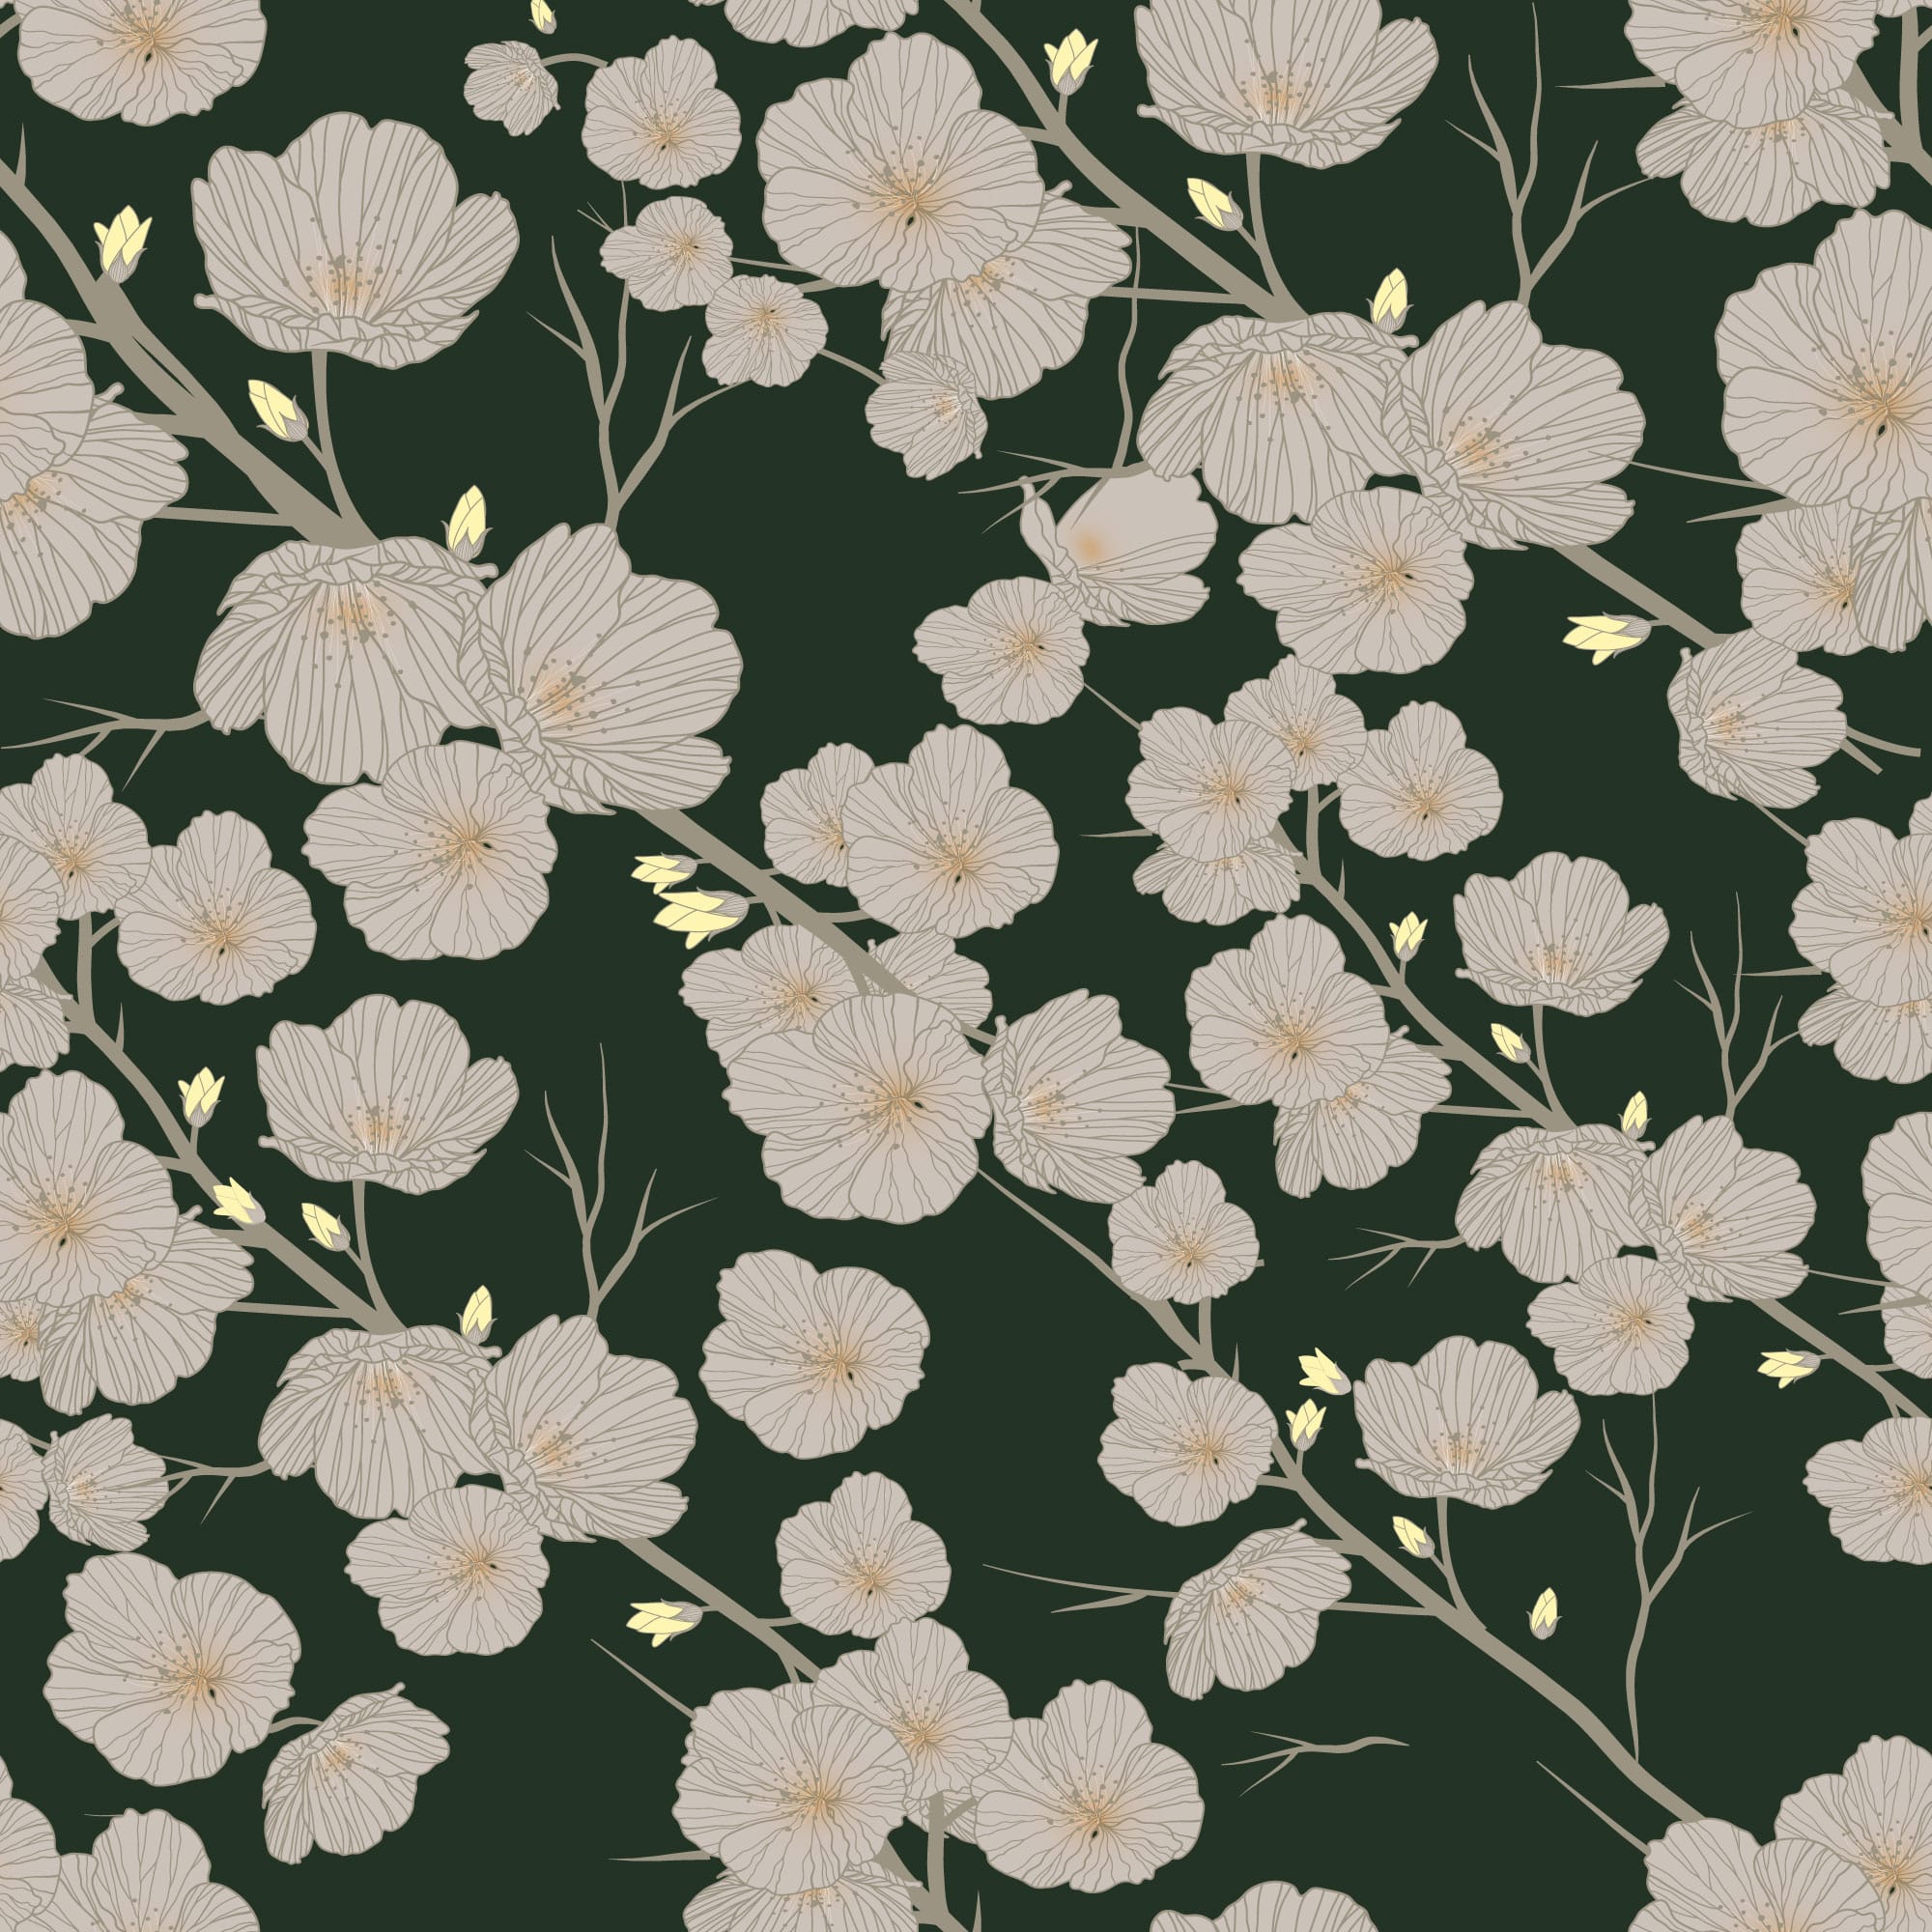 Green Aesthetic Floral Wallpaper And Stick Or Non Pasted